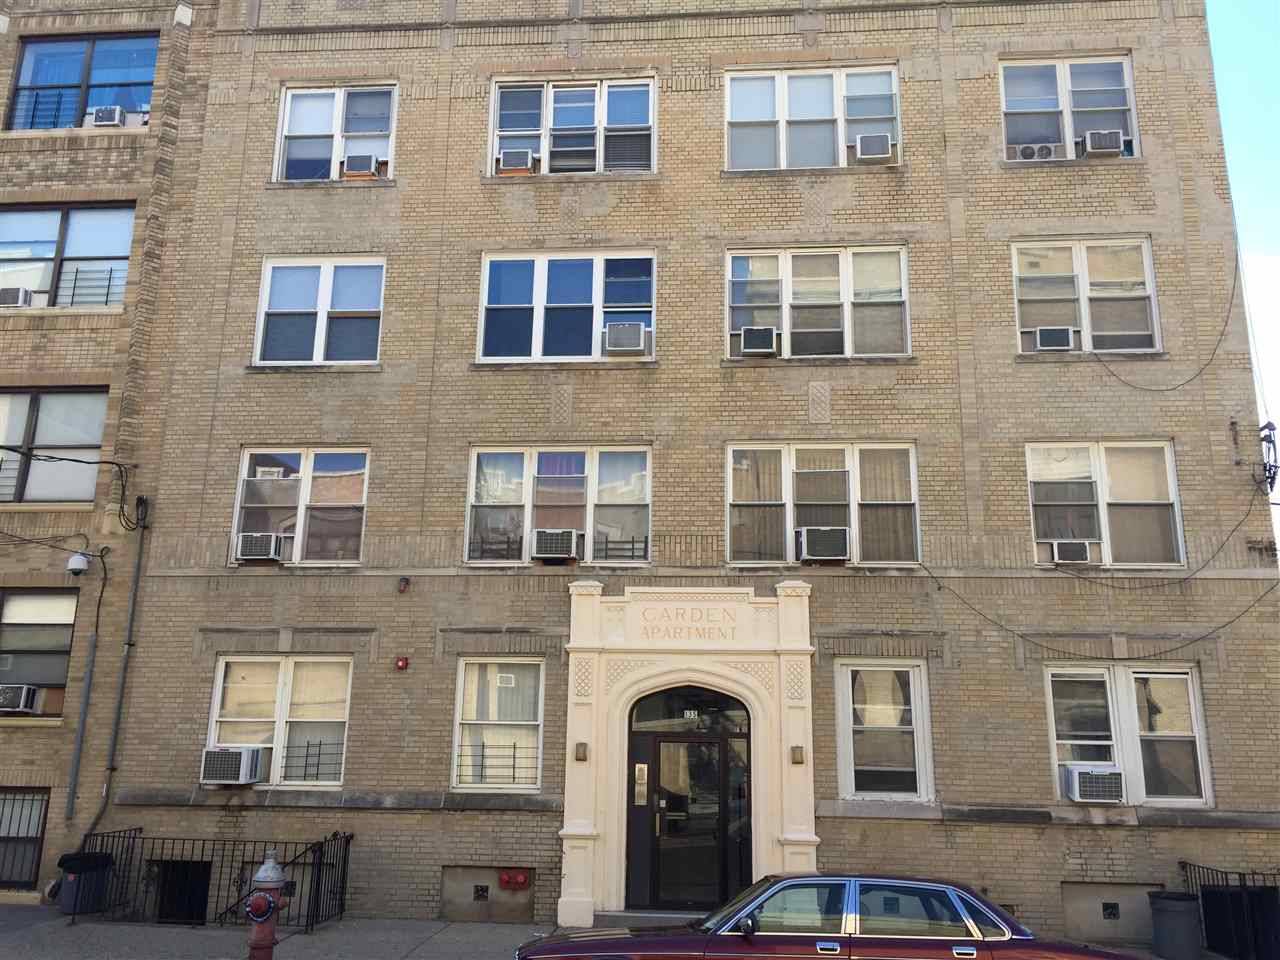 This is one of a few 3 bedroom ground level condo - 3 BR Condo Journal Square New Jersey